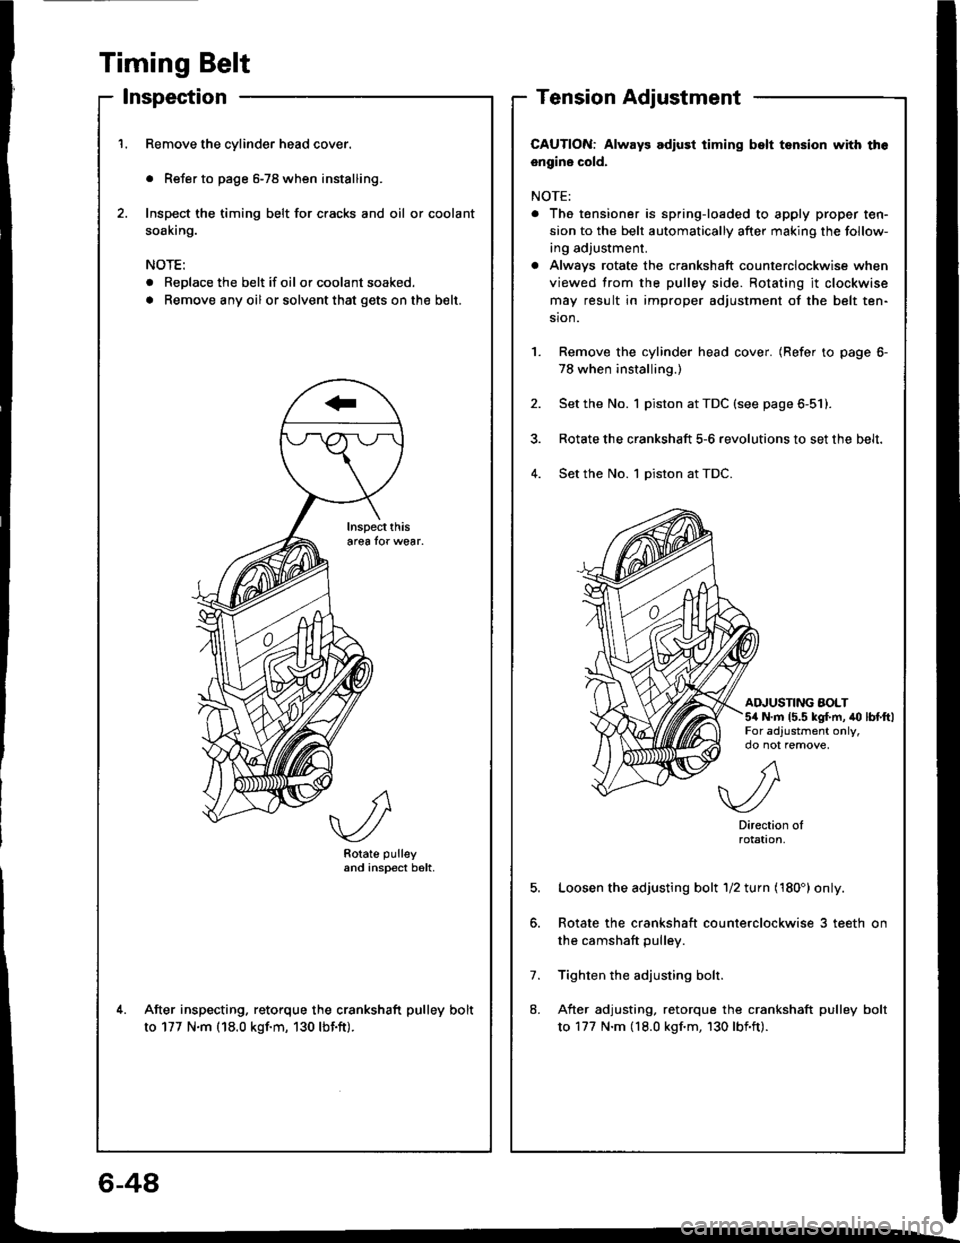 HONDA INTEGRA 1994 4.G Workshop Manual Timing Belt
lnspection
Remove the cylinder head cover.
. Refer to page 6-78 when installing.
Inspect the timing belt for cracks and oil or coolant
soaking.
NOTE:
. Replace the belt if oil or coolant s